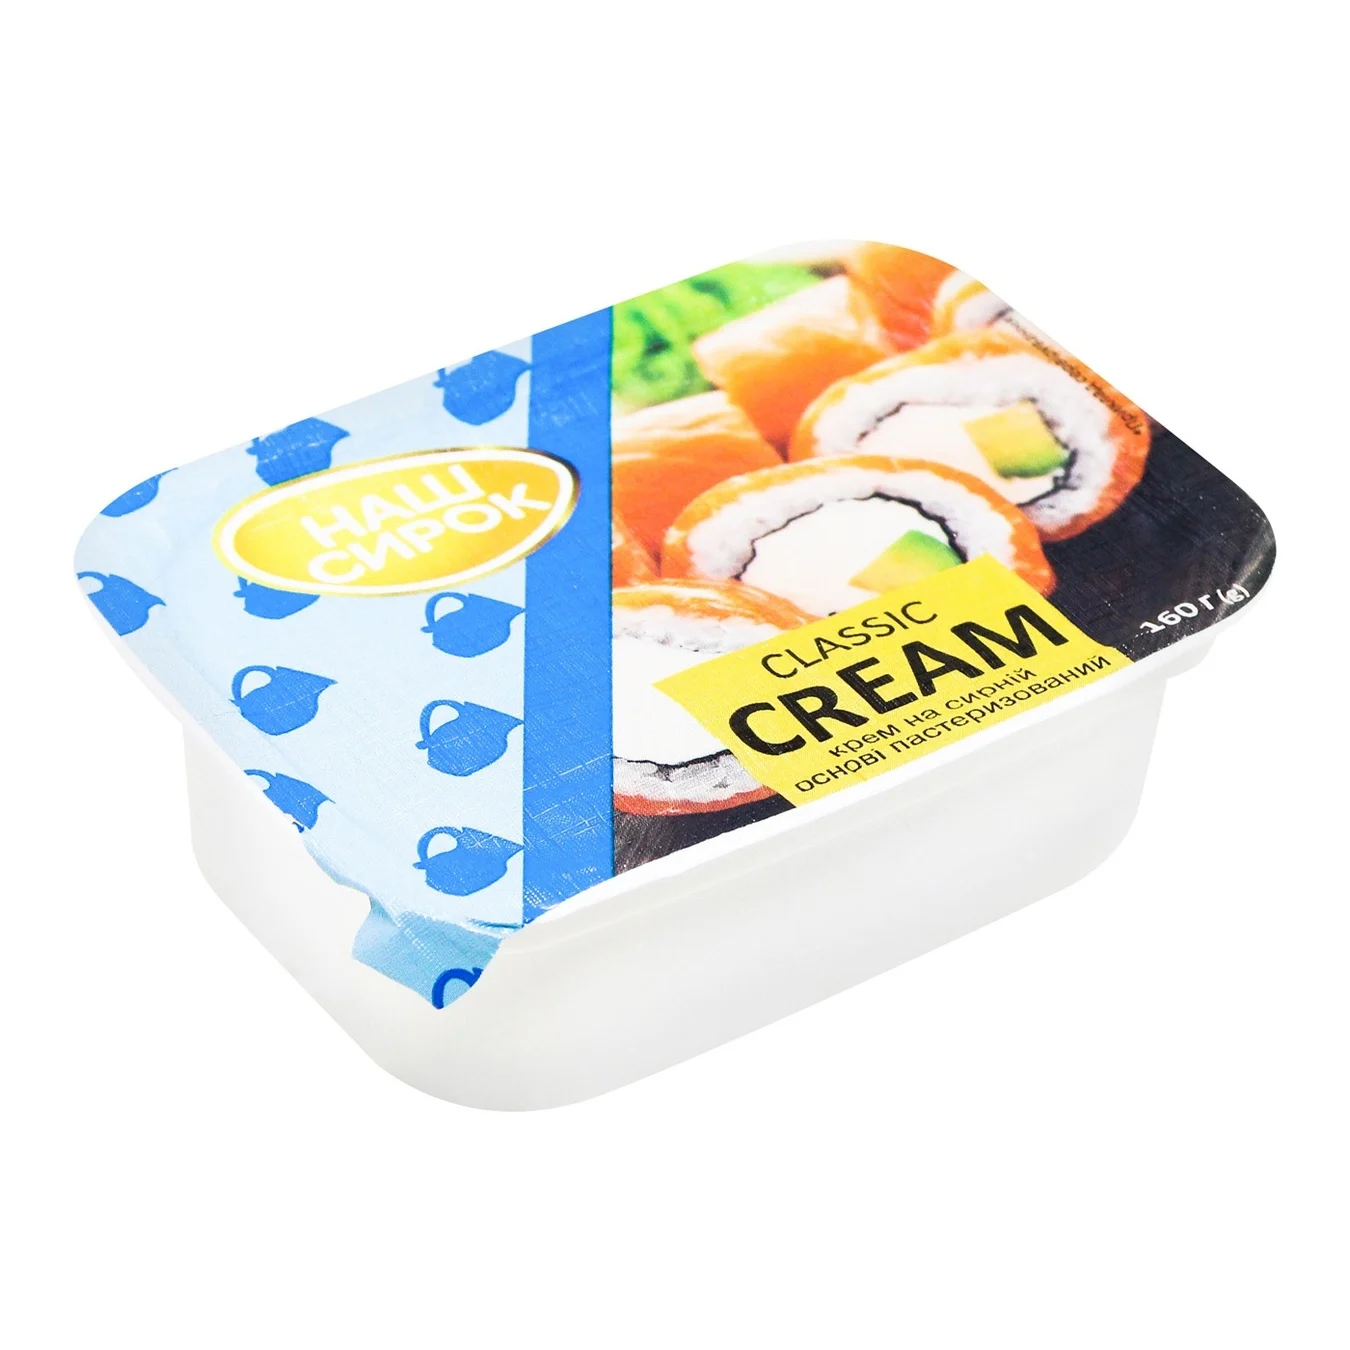 Cream Our Classic Cream cottage cheese is pasteurized 60% 160g 2